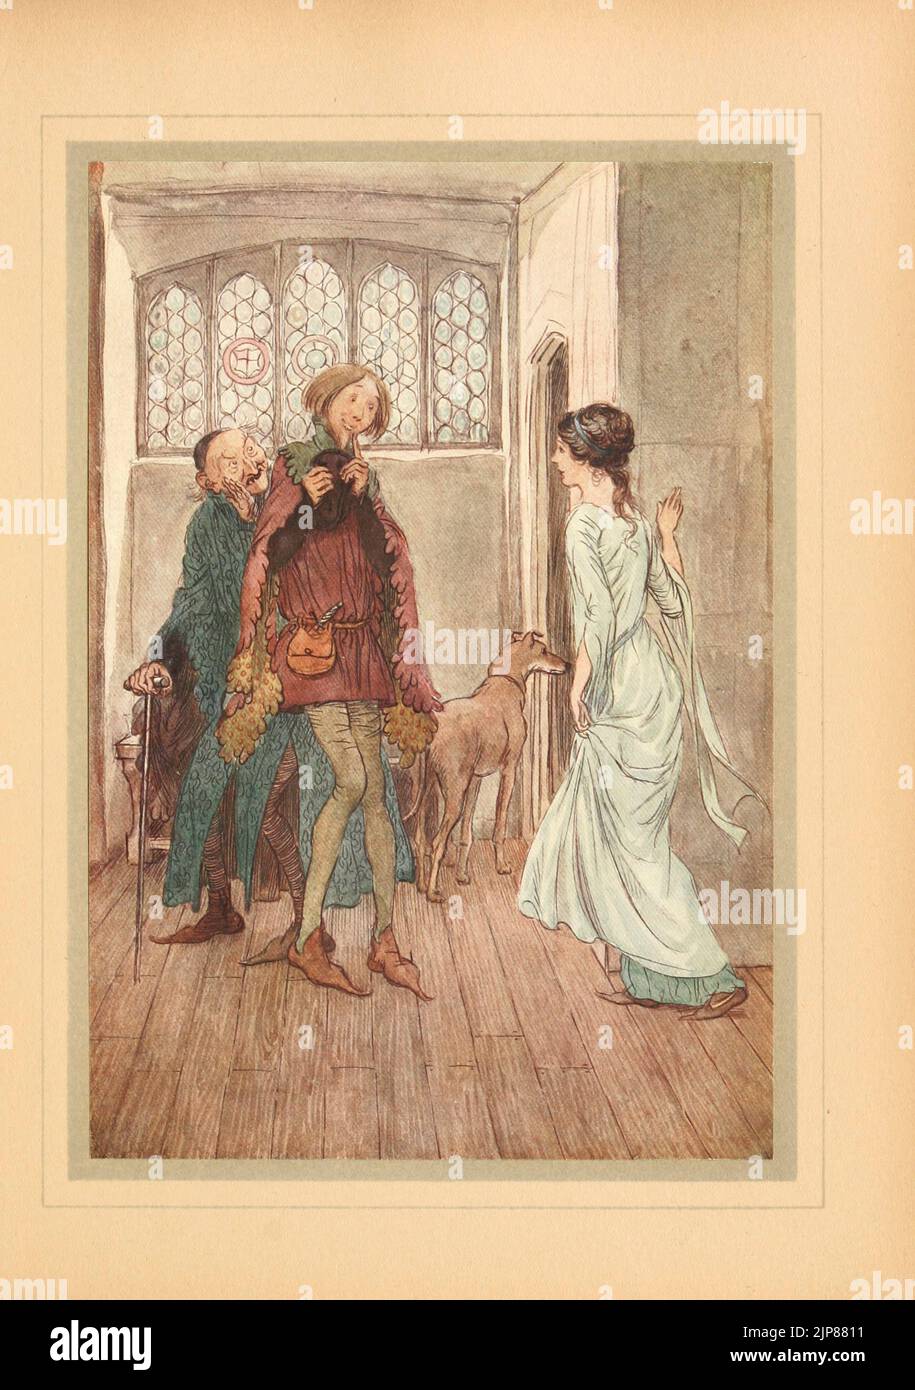 I had a father, Mistress Anne : my uncle can tell you good jests of him from the book ' The merry wives of Windsor ' by  William Shakespeare Illustrated by Hugh Thomson, Publication date 1910 Publisher New York : F.A. Stokes The Merry Wives of Windsor or Sir John Falstaff and the Merry Wives of Windsor is a comedy by William Shakespeare first published in 1602, Stock Photo